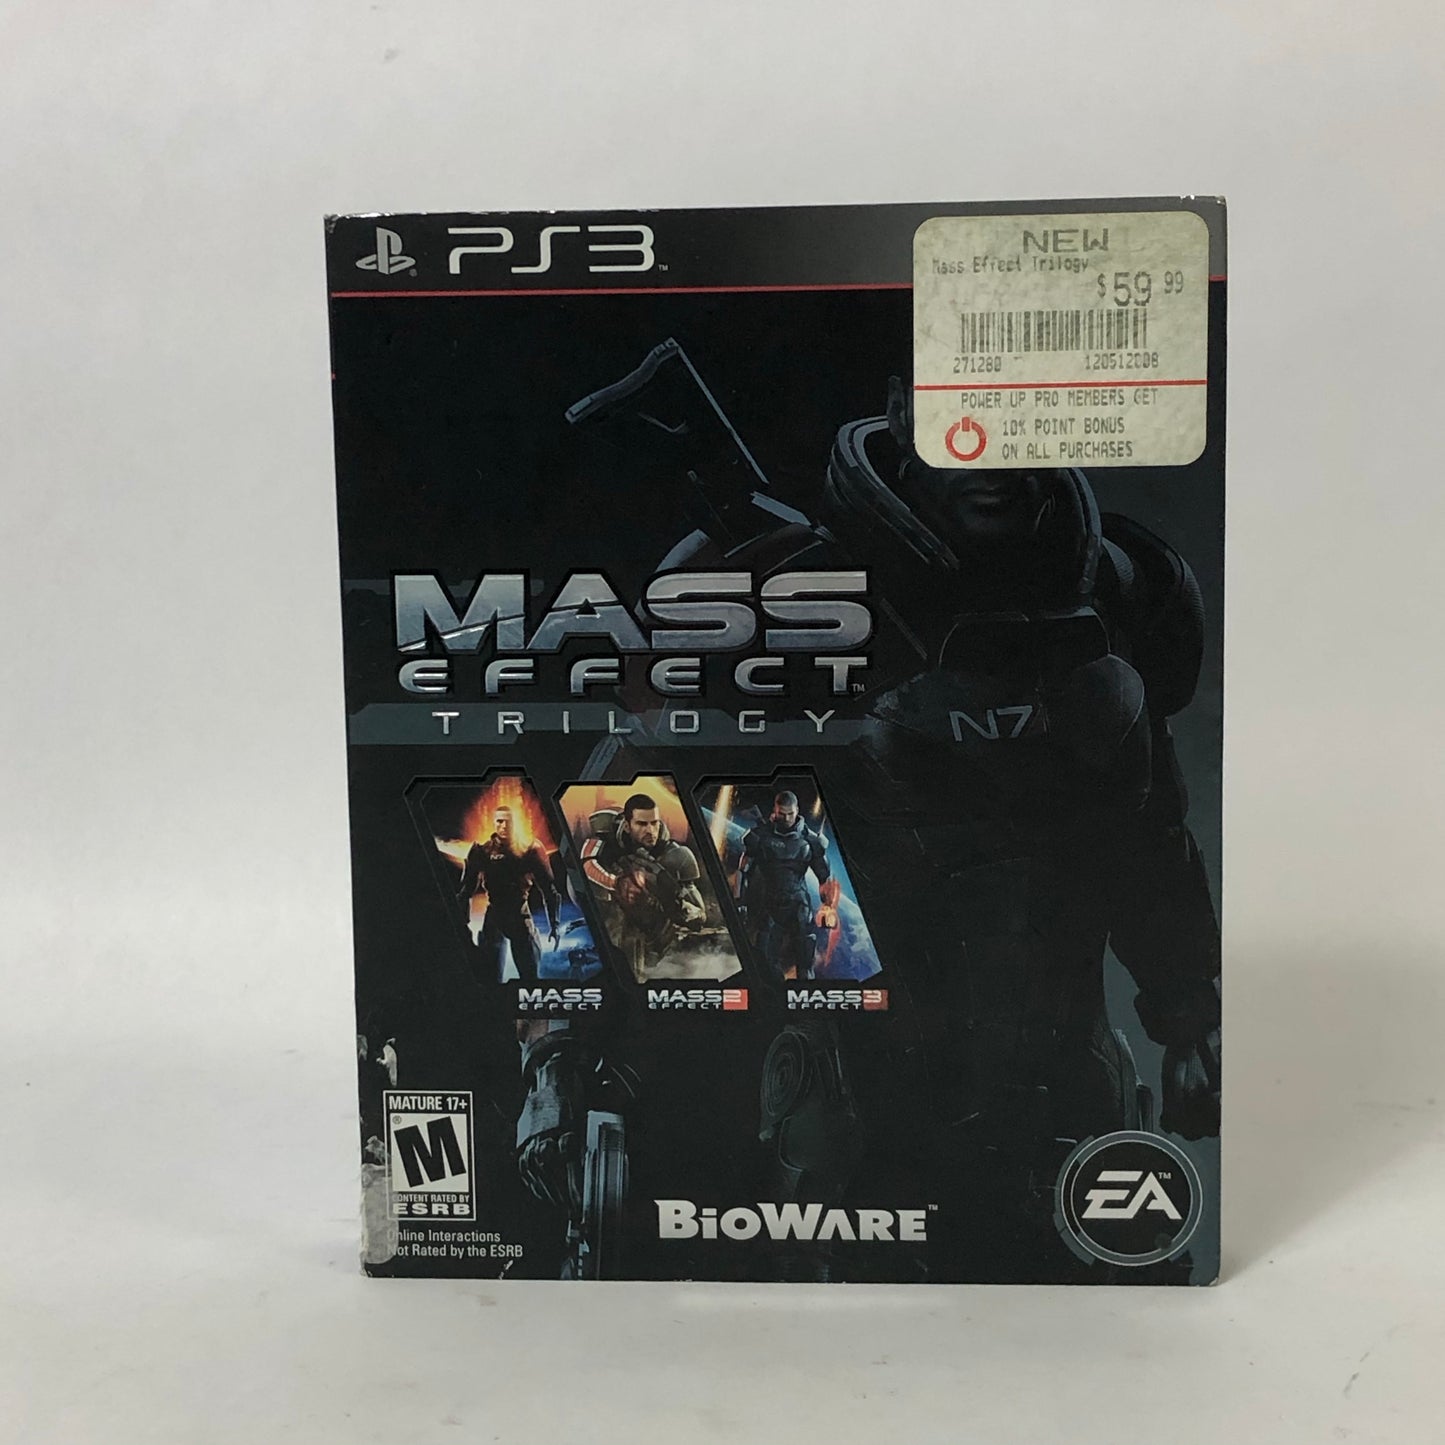 MASS EFFECT TRILOGY (SONY PLAYSTATION 3, 2012) CLEAN DISCS!